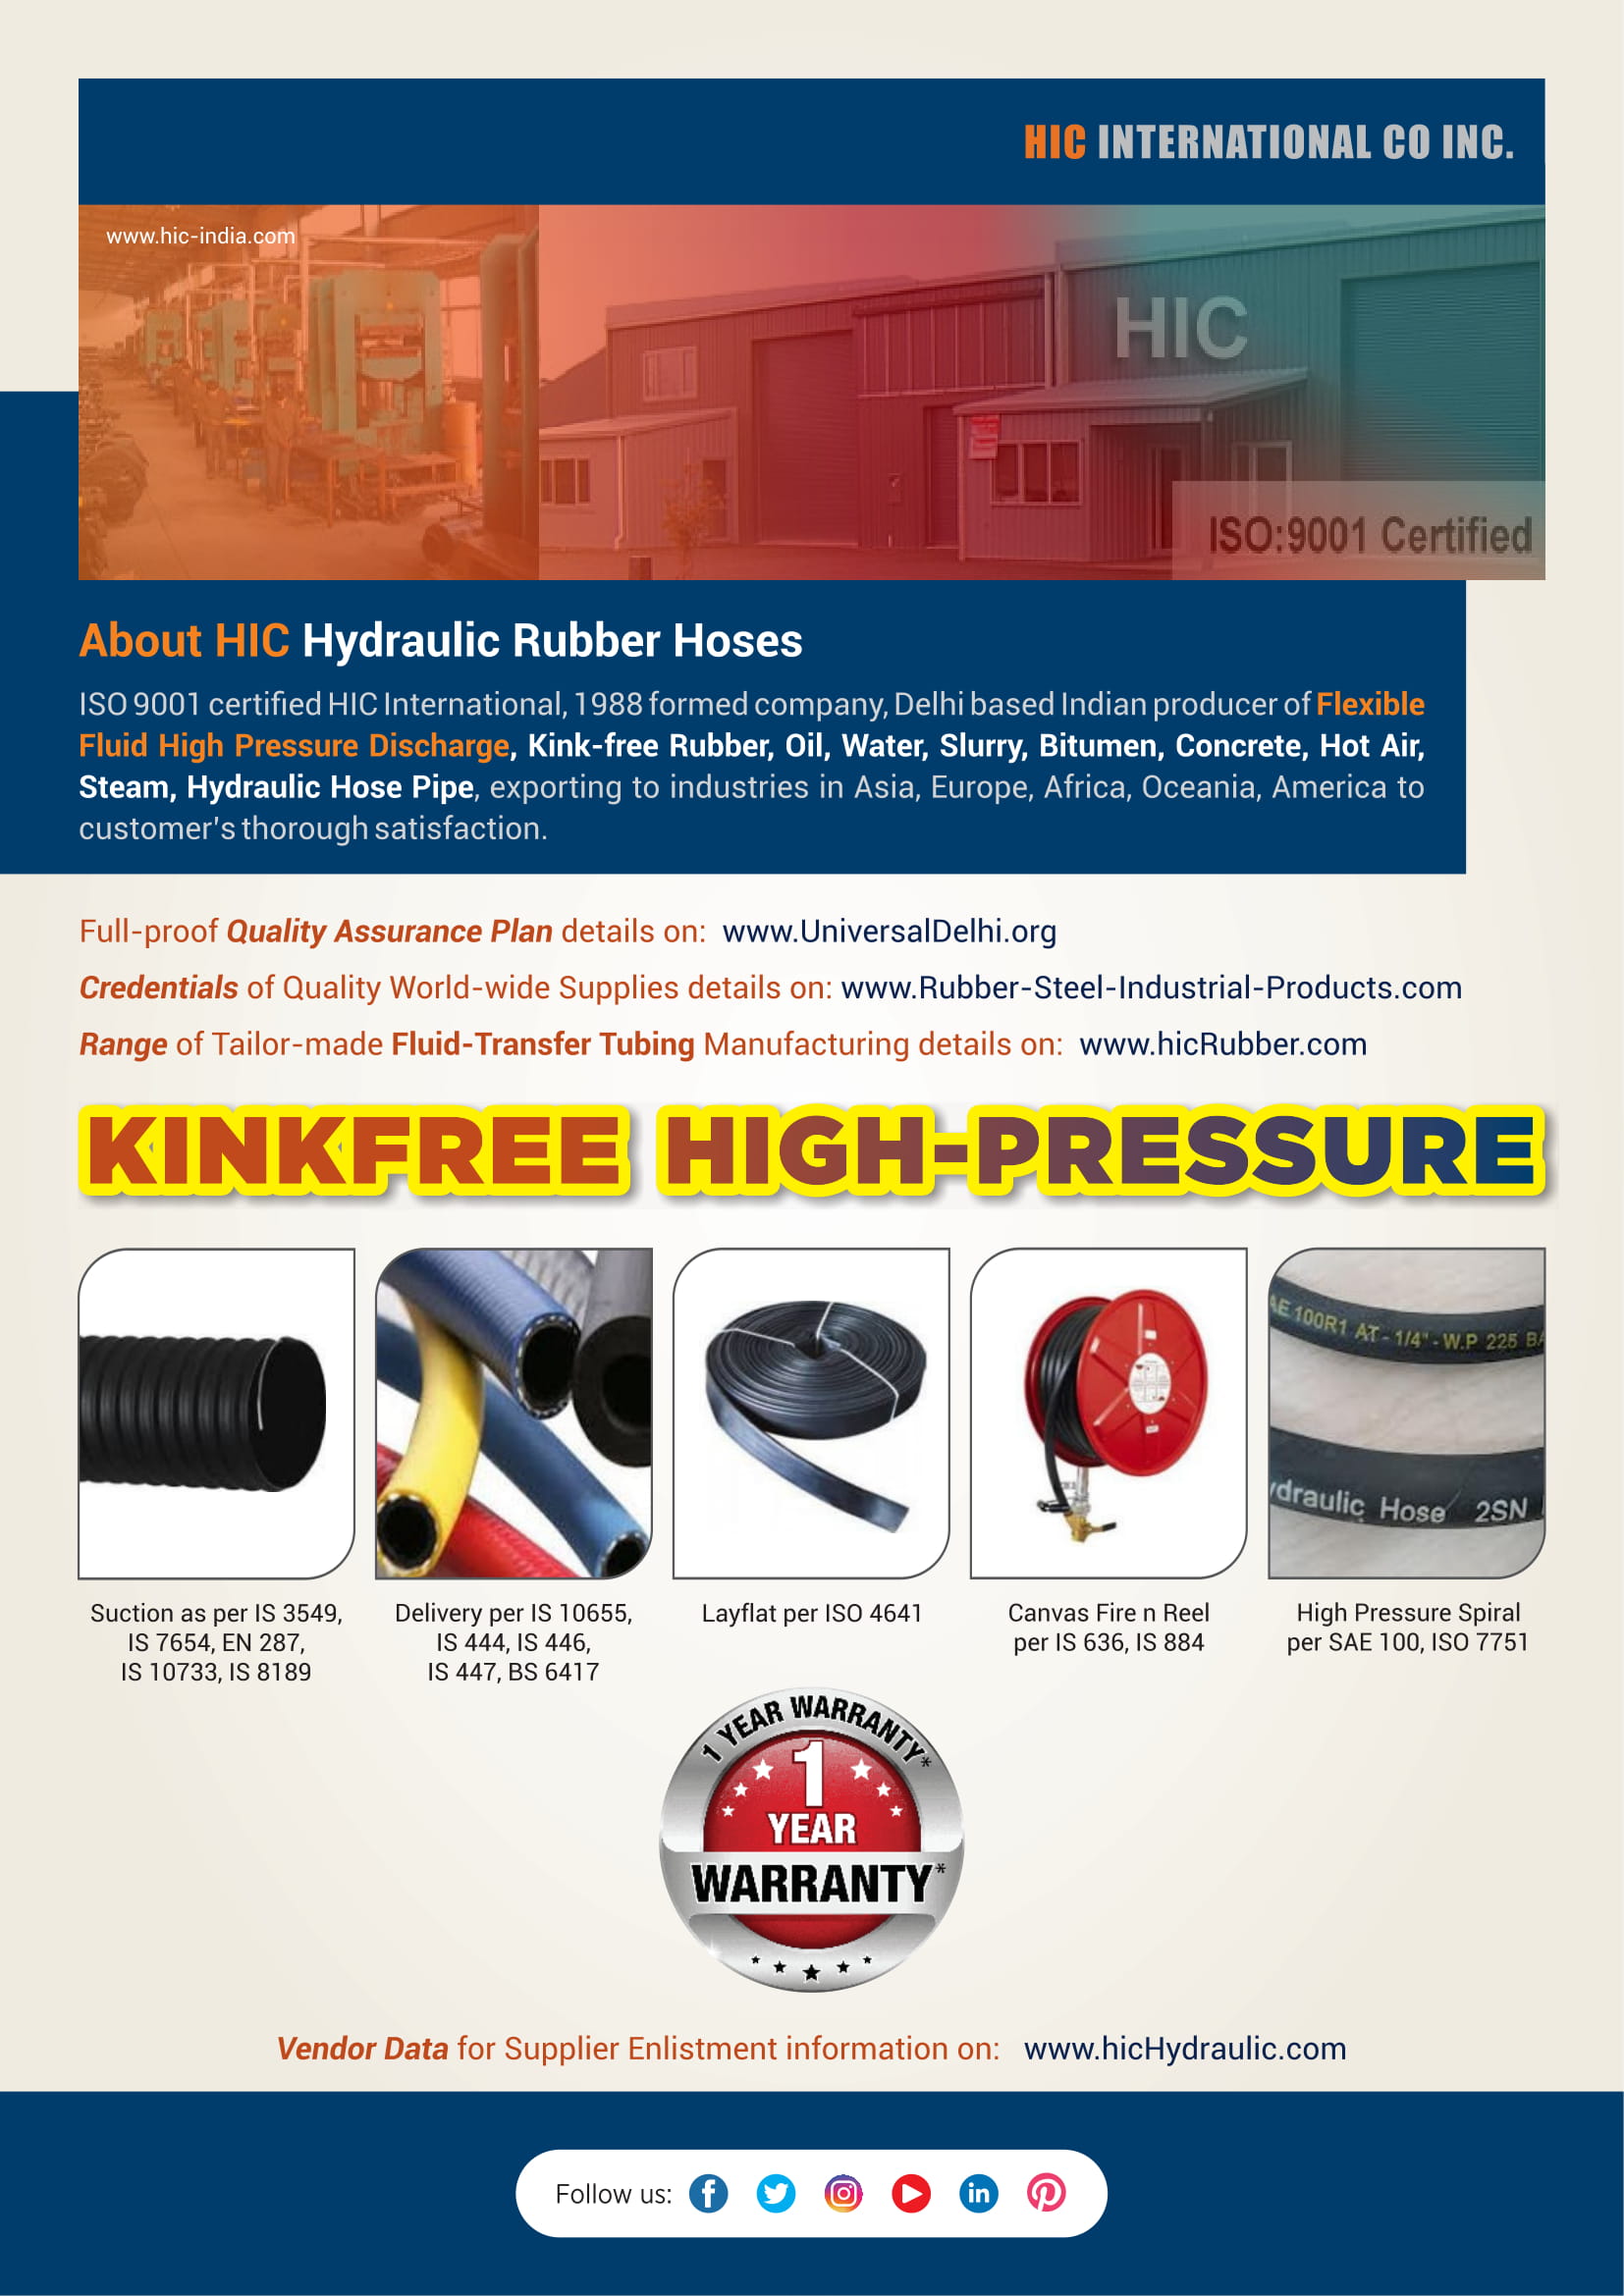 Lit HOSES Hydraulic Rubber - HIC India